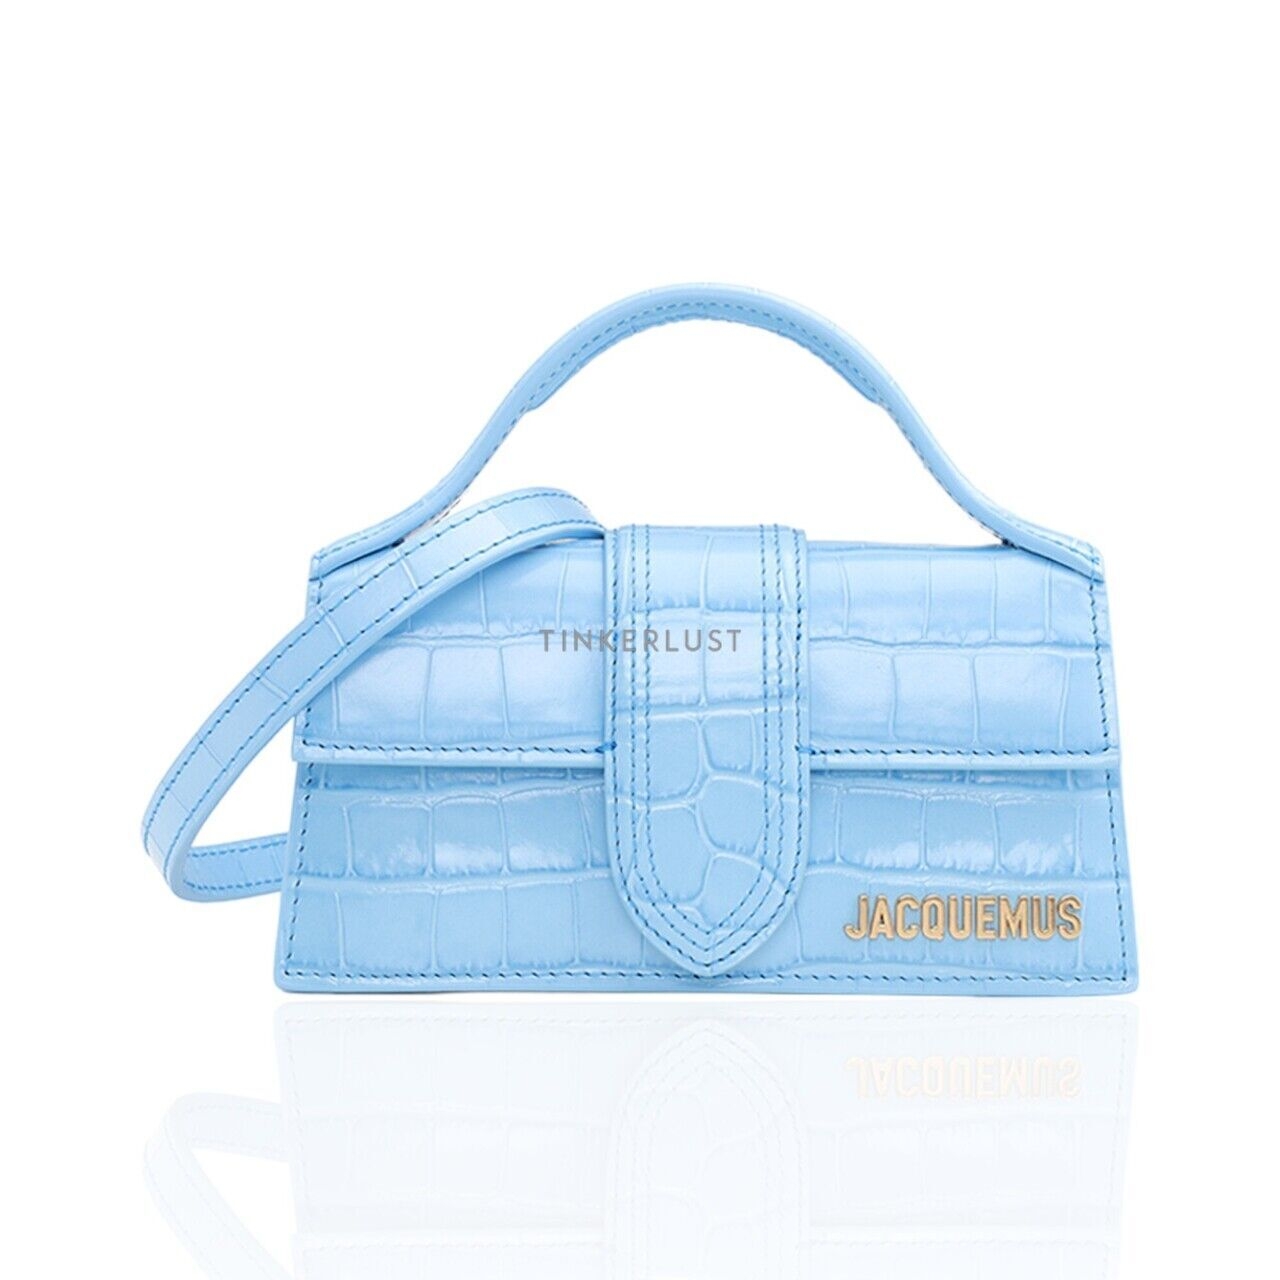 Jacquemus Le Bambino in Blue Crocodile Effect Leather Satchel Bag